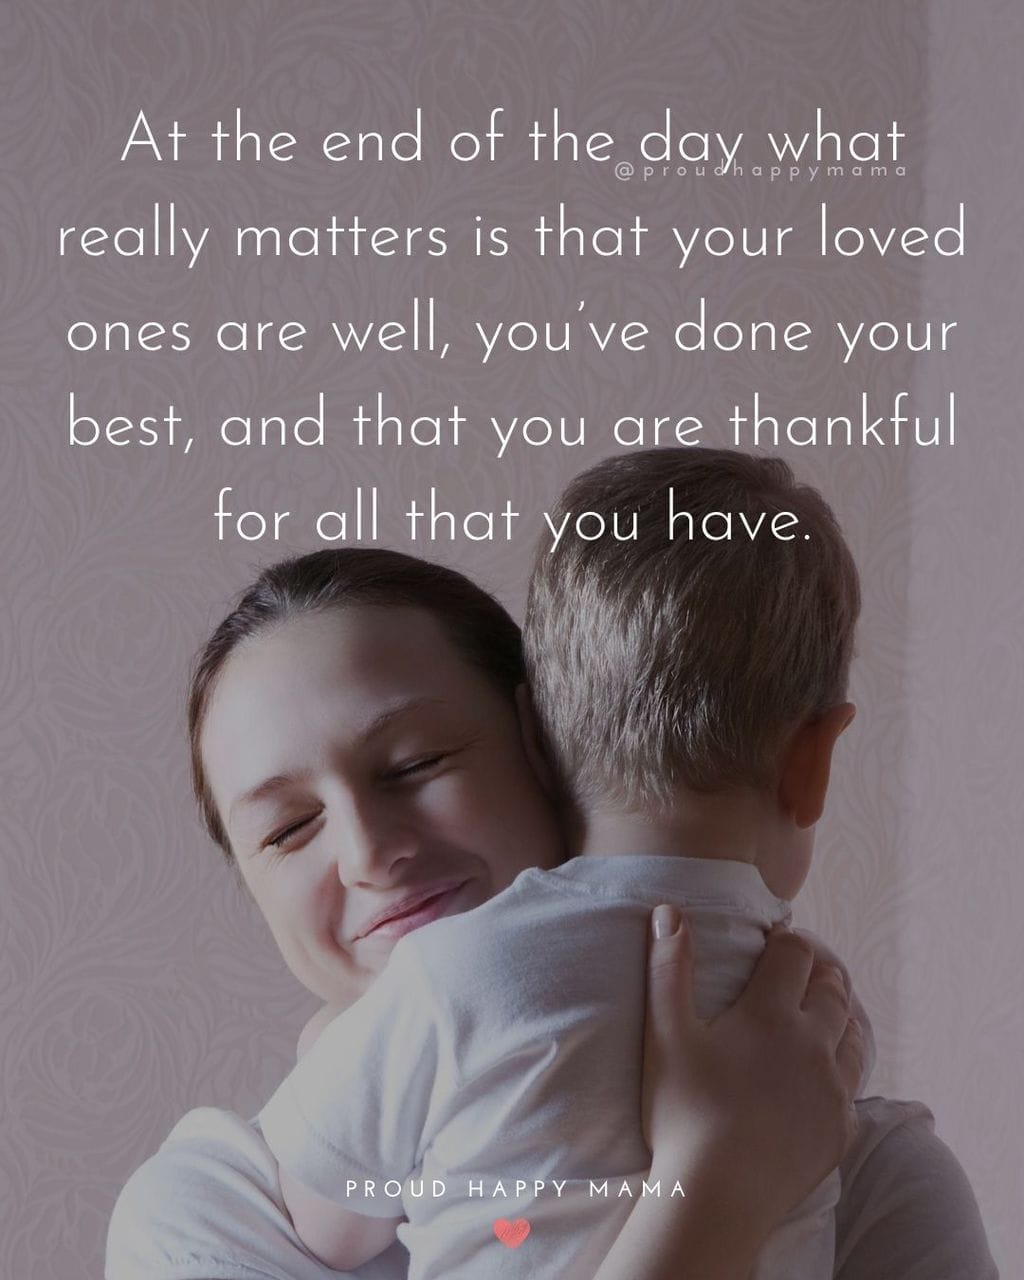 Family Sayings | At the end of the day what really matters is that your loved ones are well, you’ve done your best, and that you are thankful for all that you have.